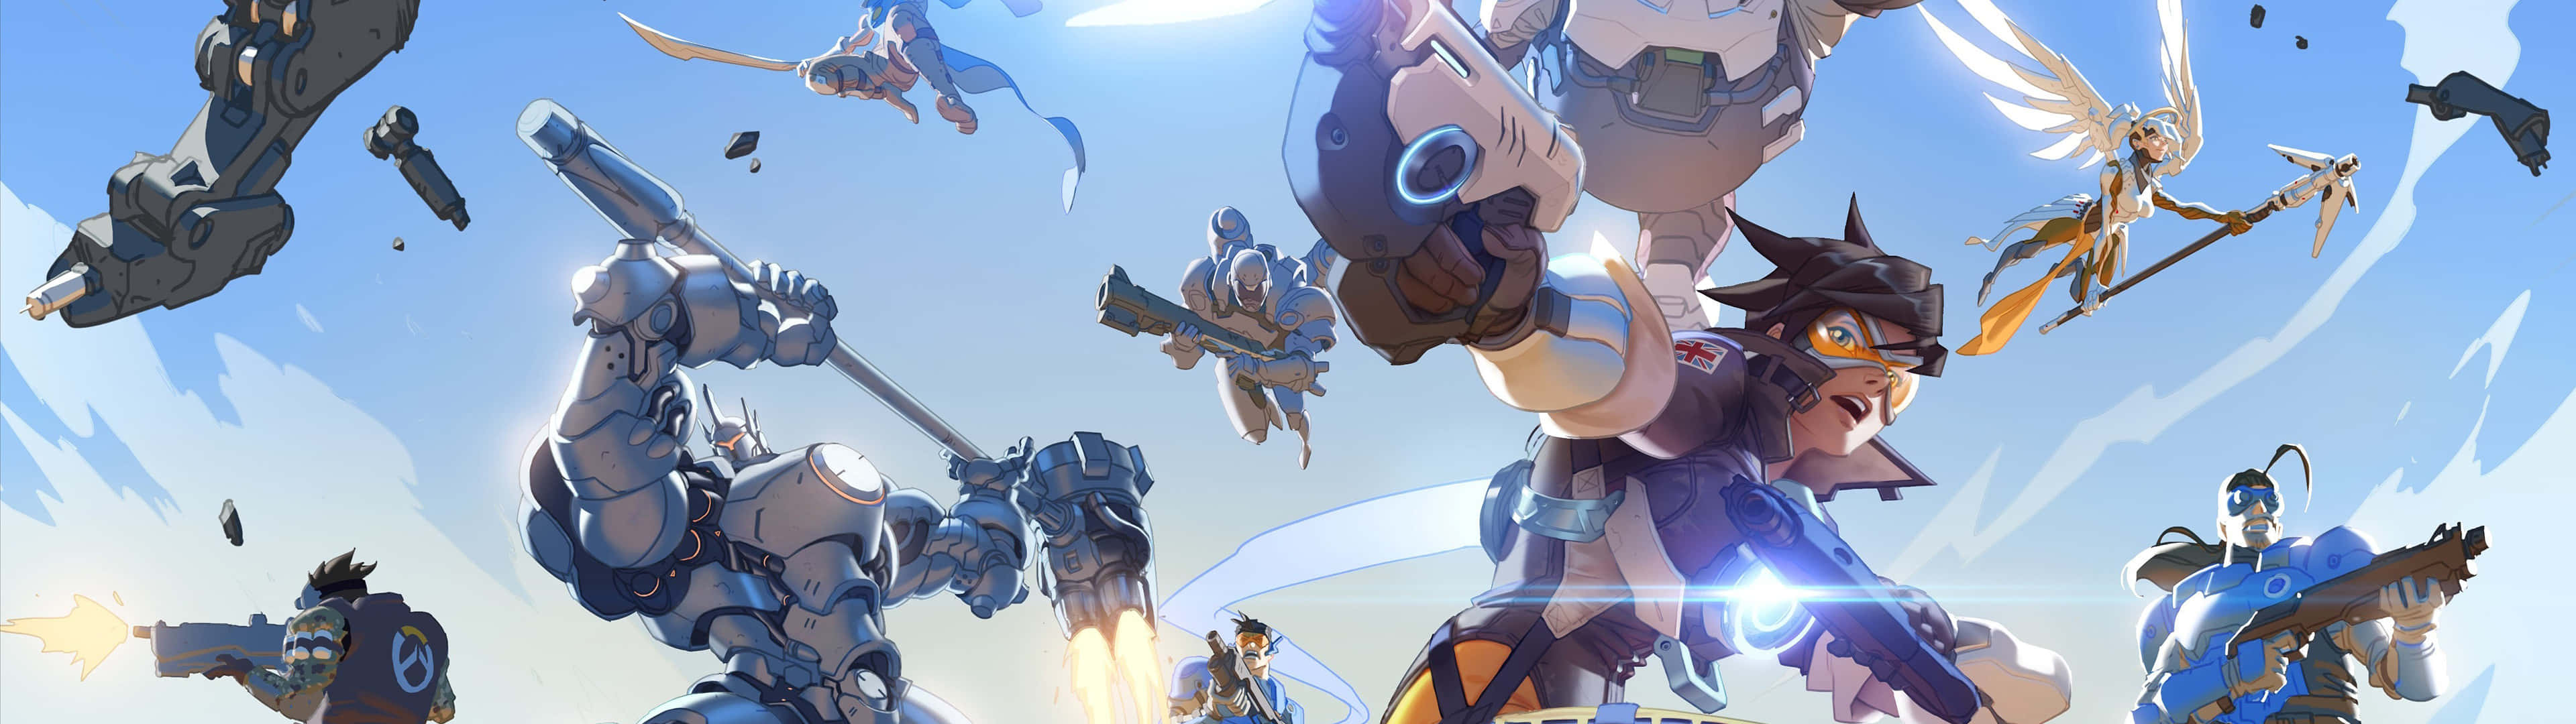 Outwit Your Enemies with Overwatch Dual Wallpaper